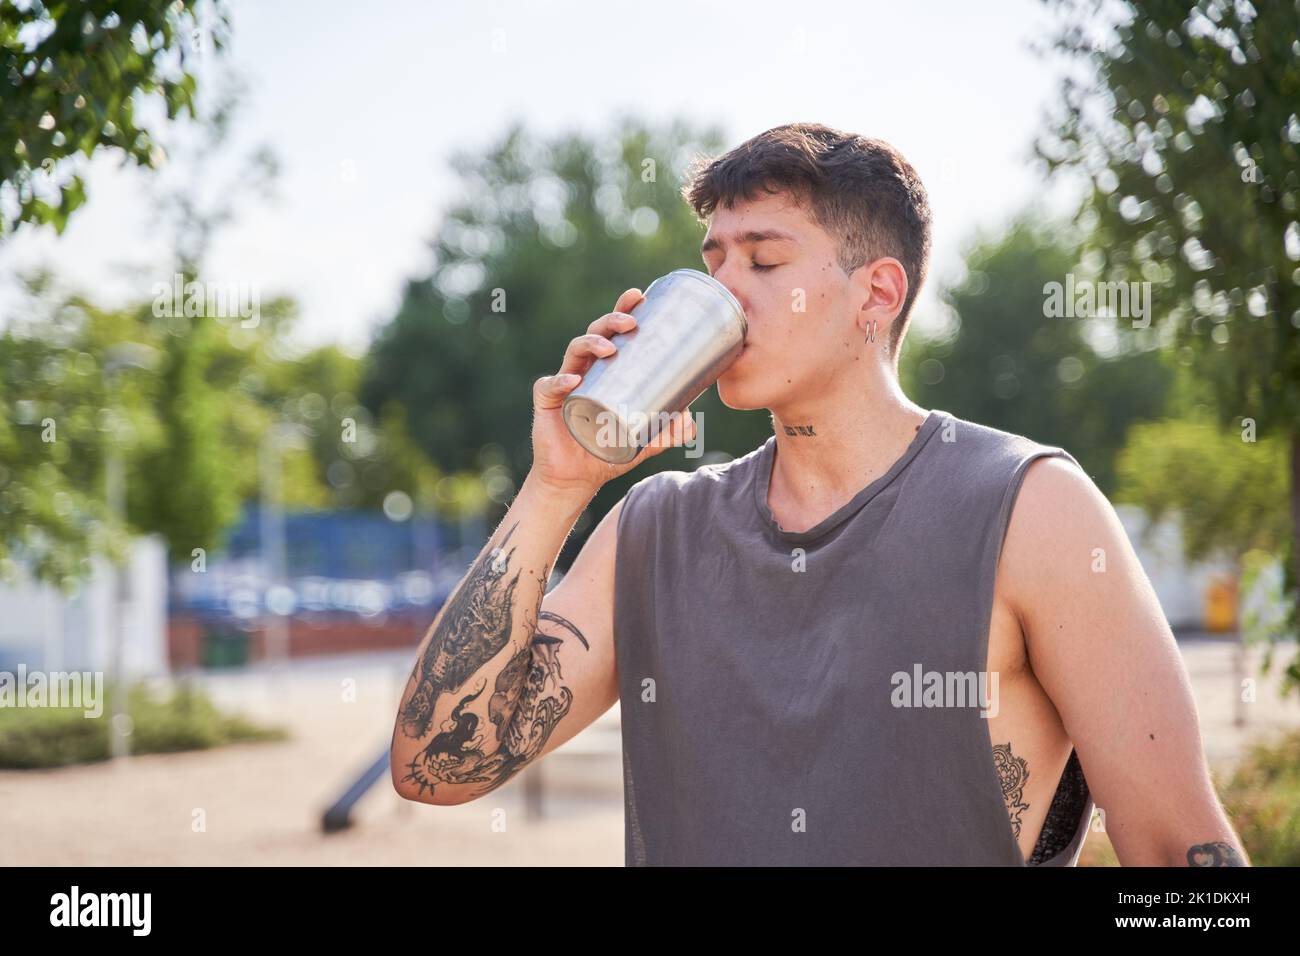 young athlete drinking water from the bottle Stock Photo